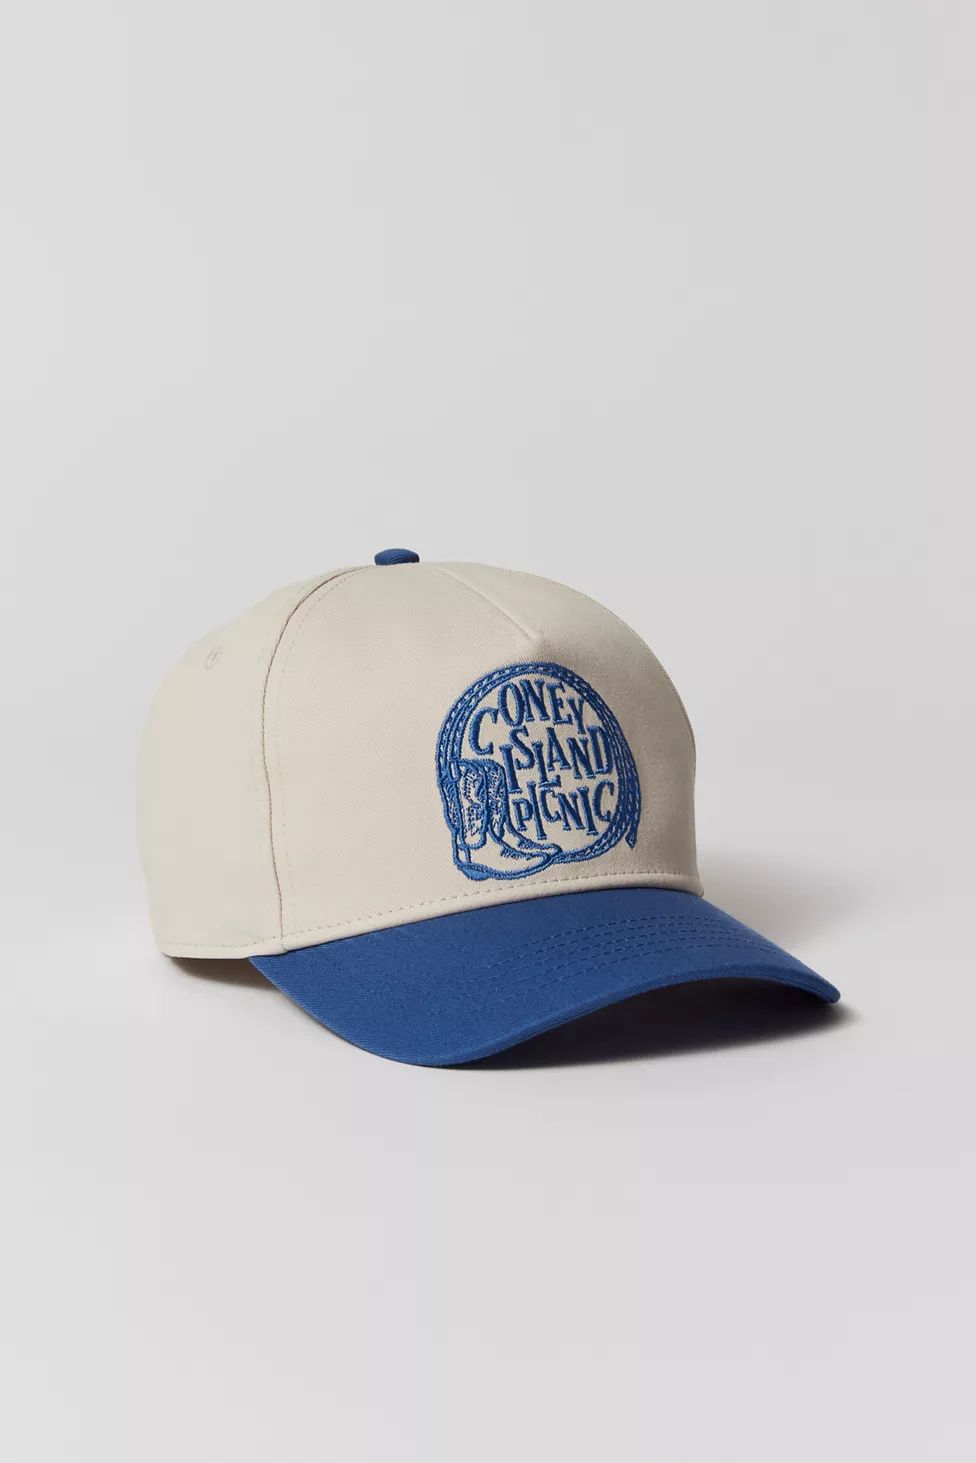 Coney Island Picnic Rodeo 5-Panel Baseball Hat | Urban Outfitters (US and RoW)